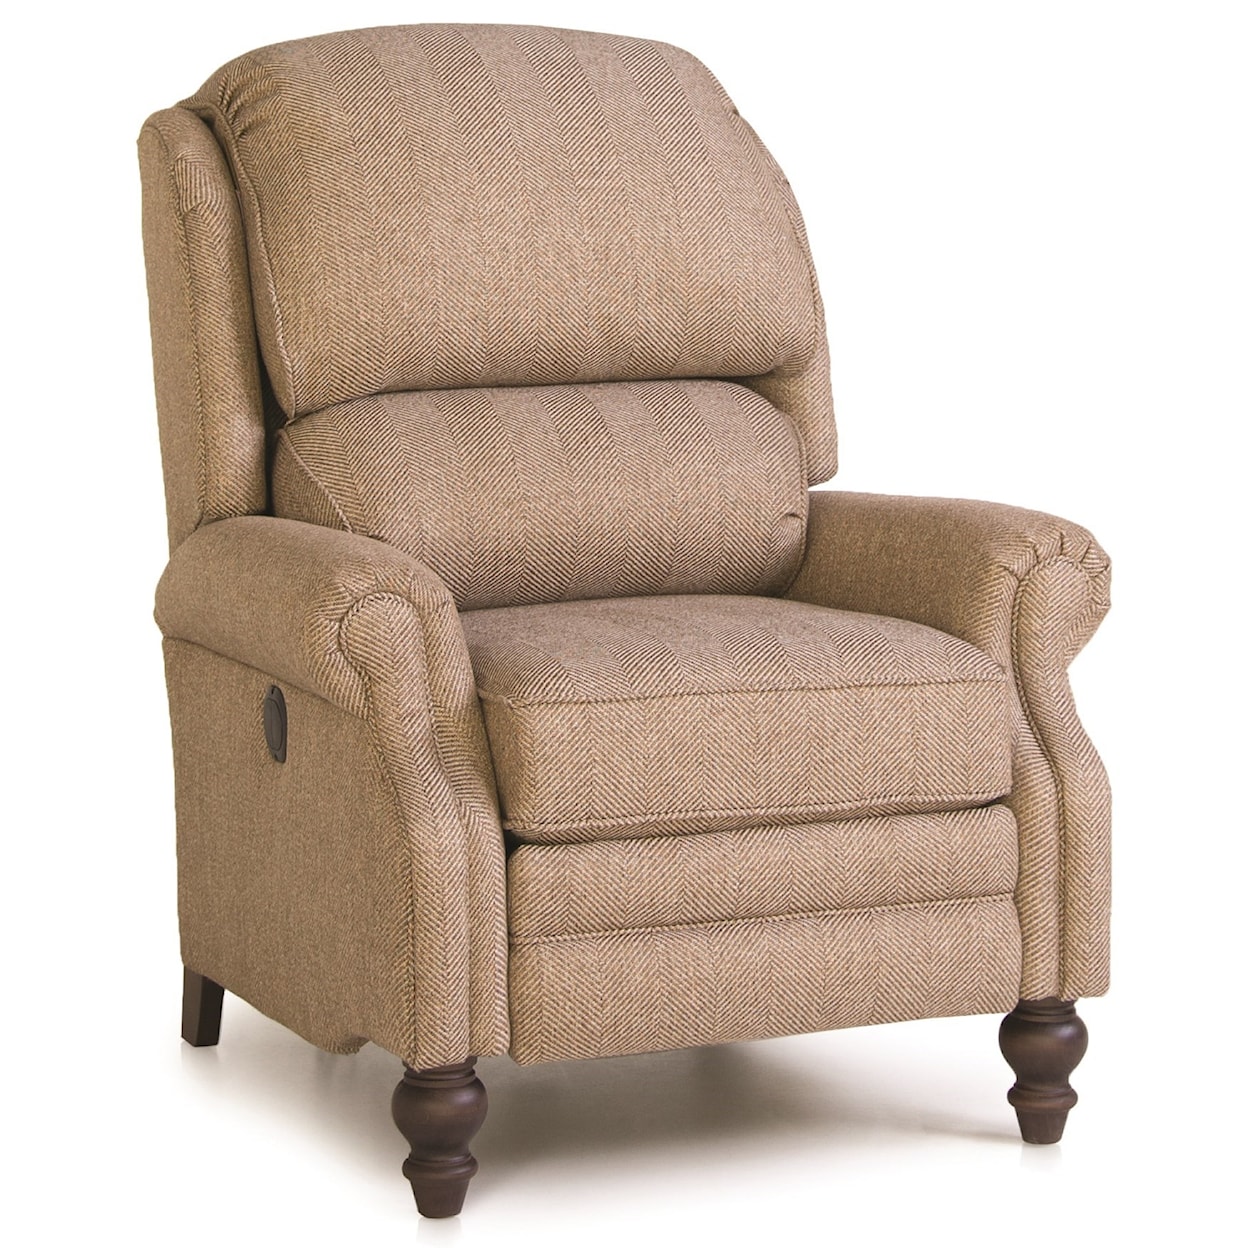 Smith Brothers 705 Pressback Reclining Chair